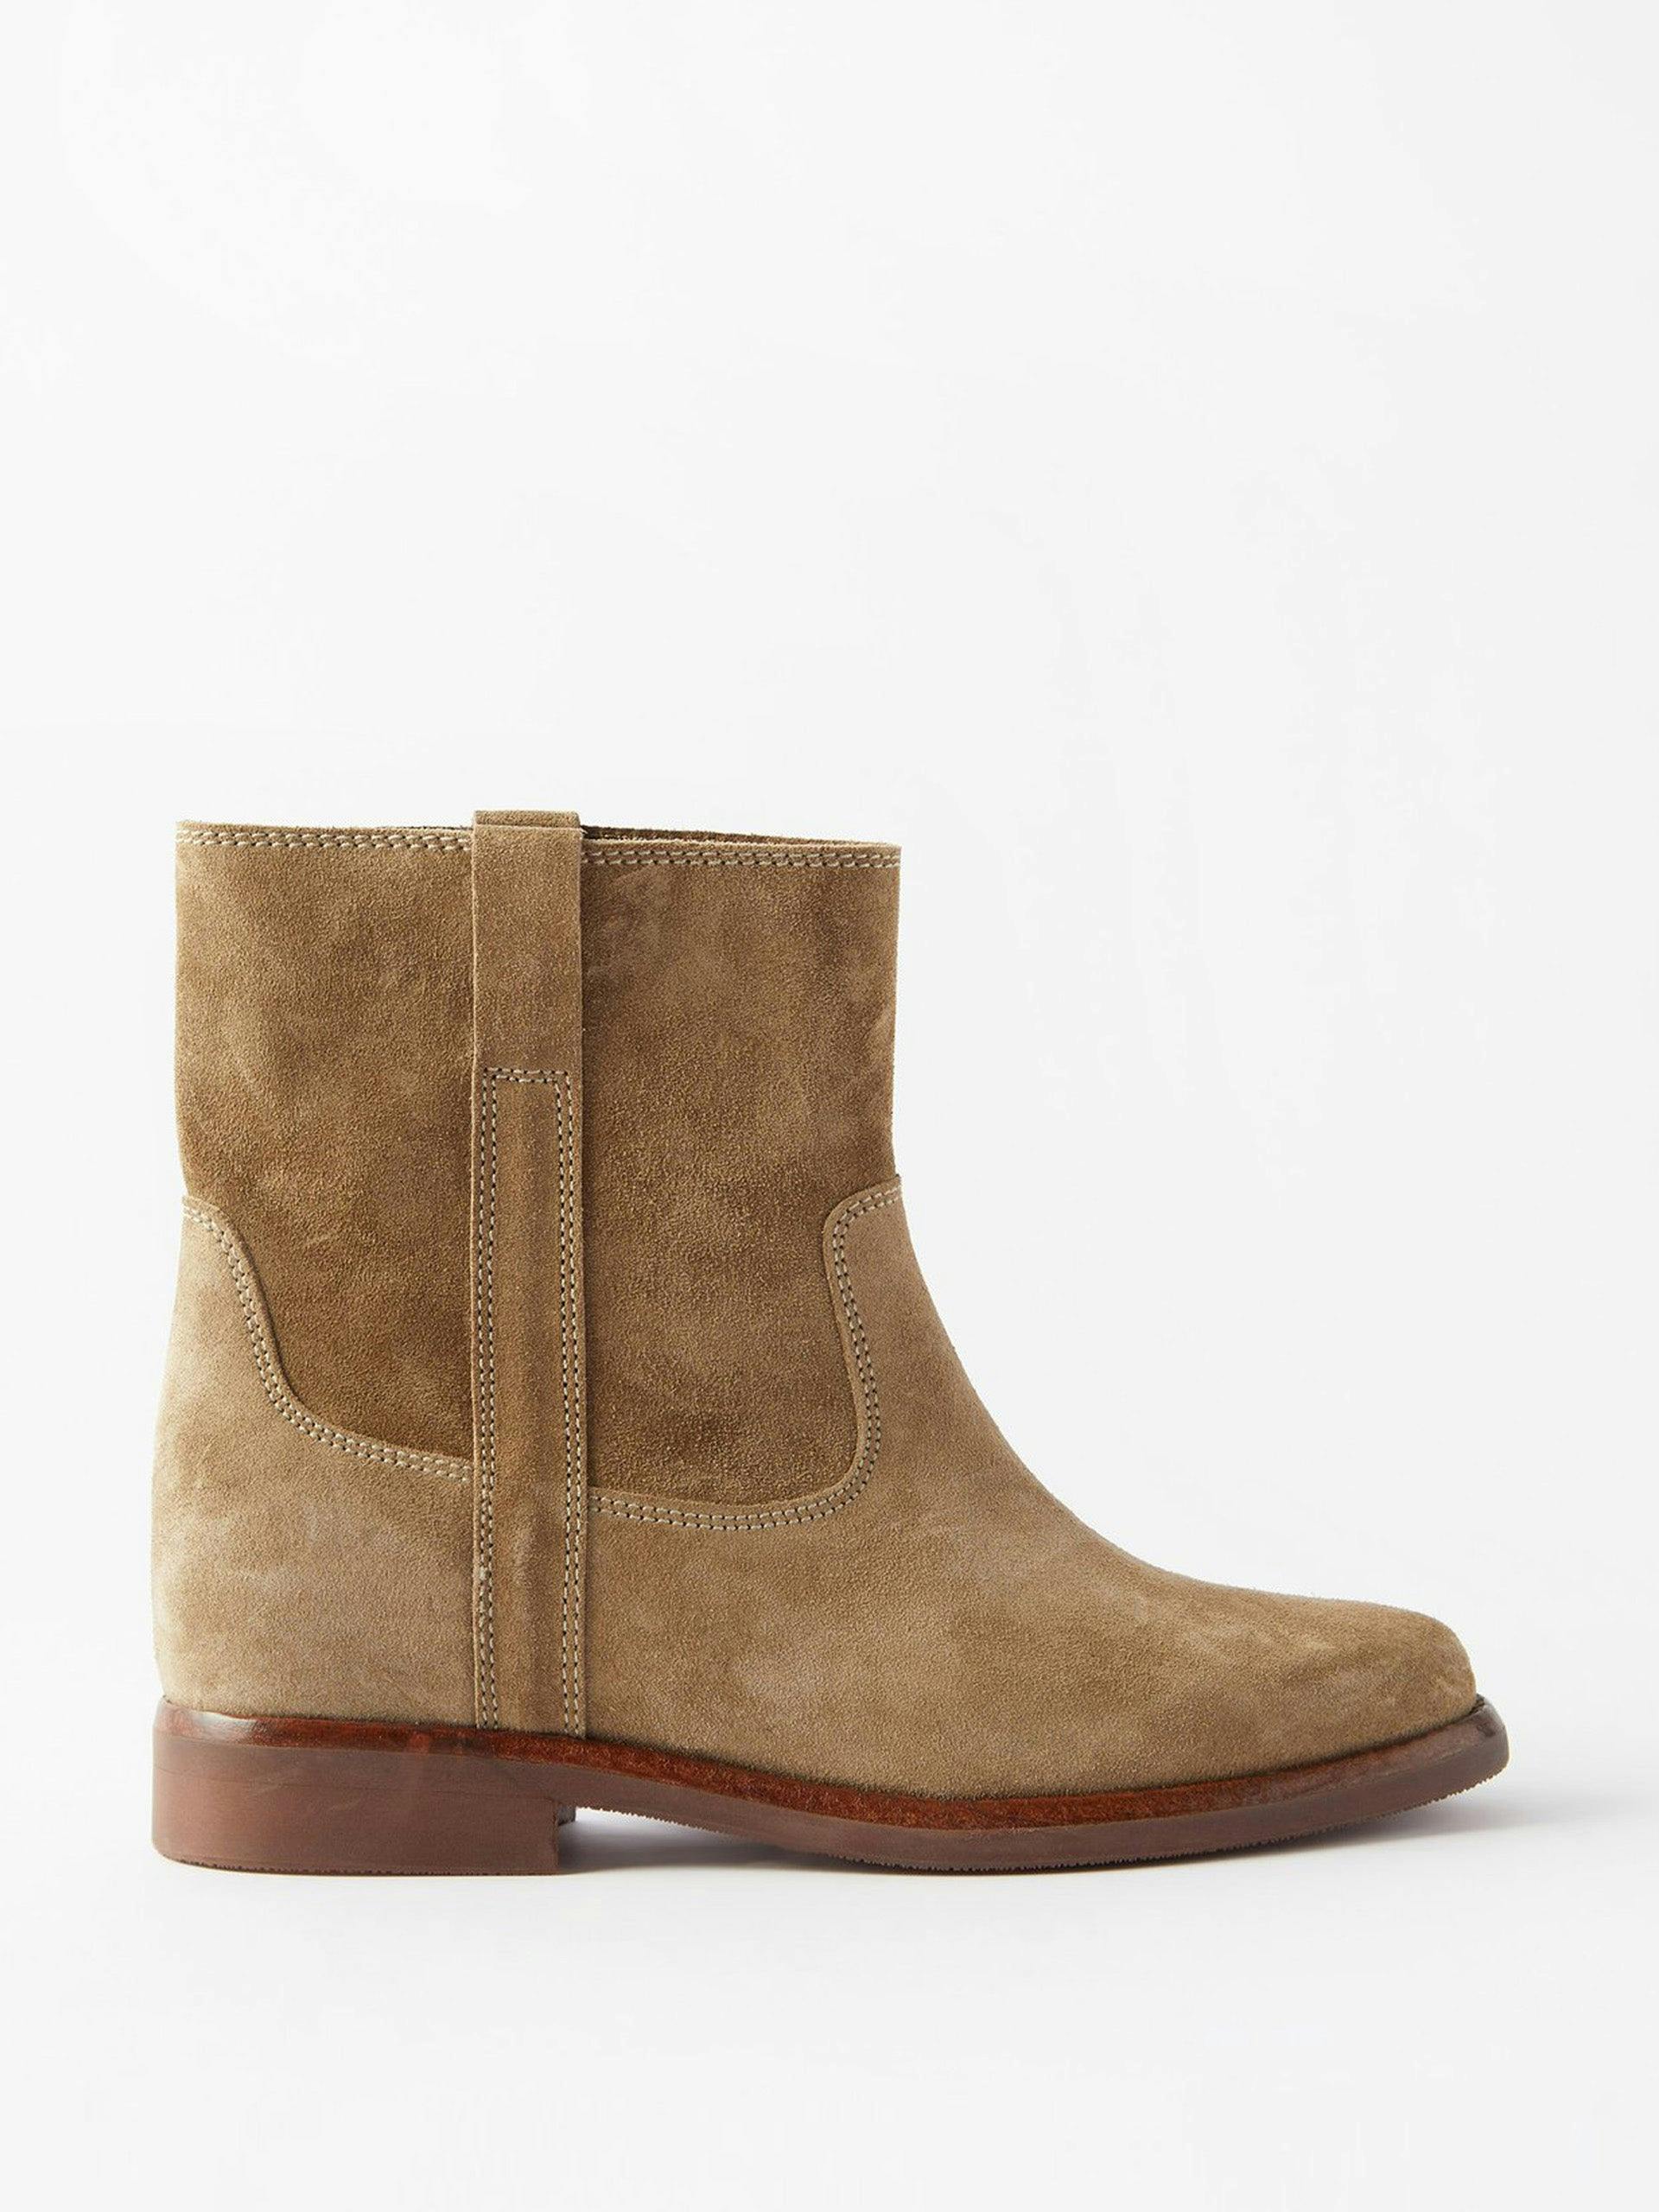 Susee suede ankle boots